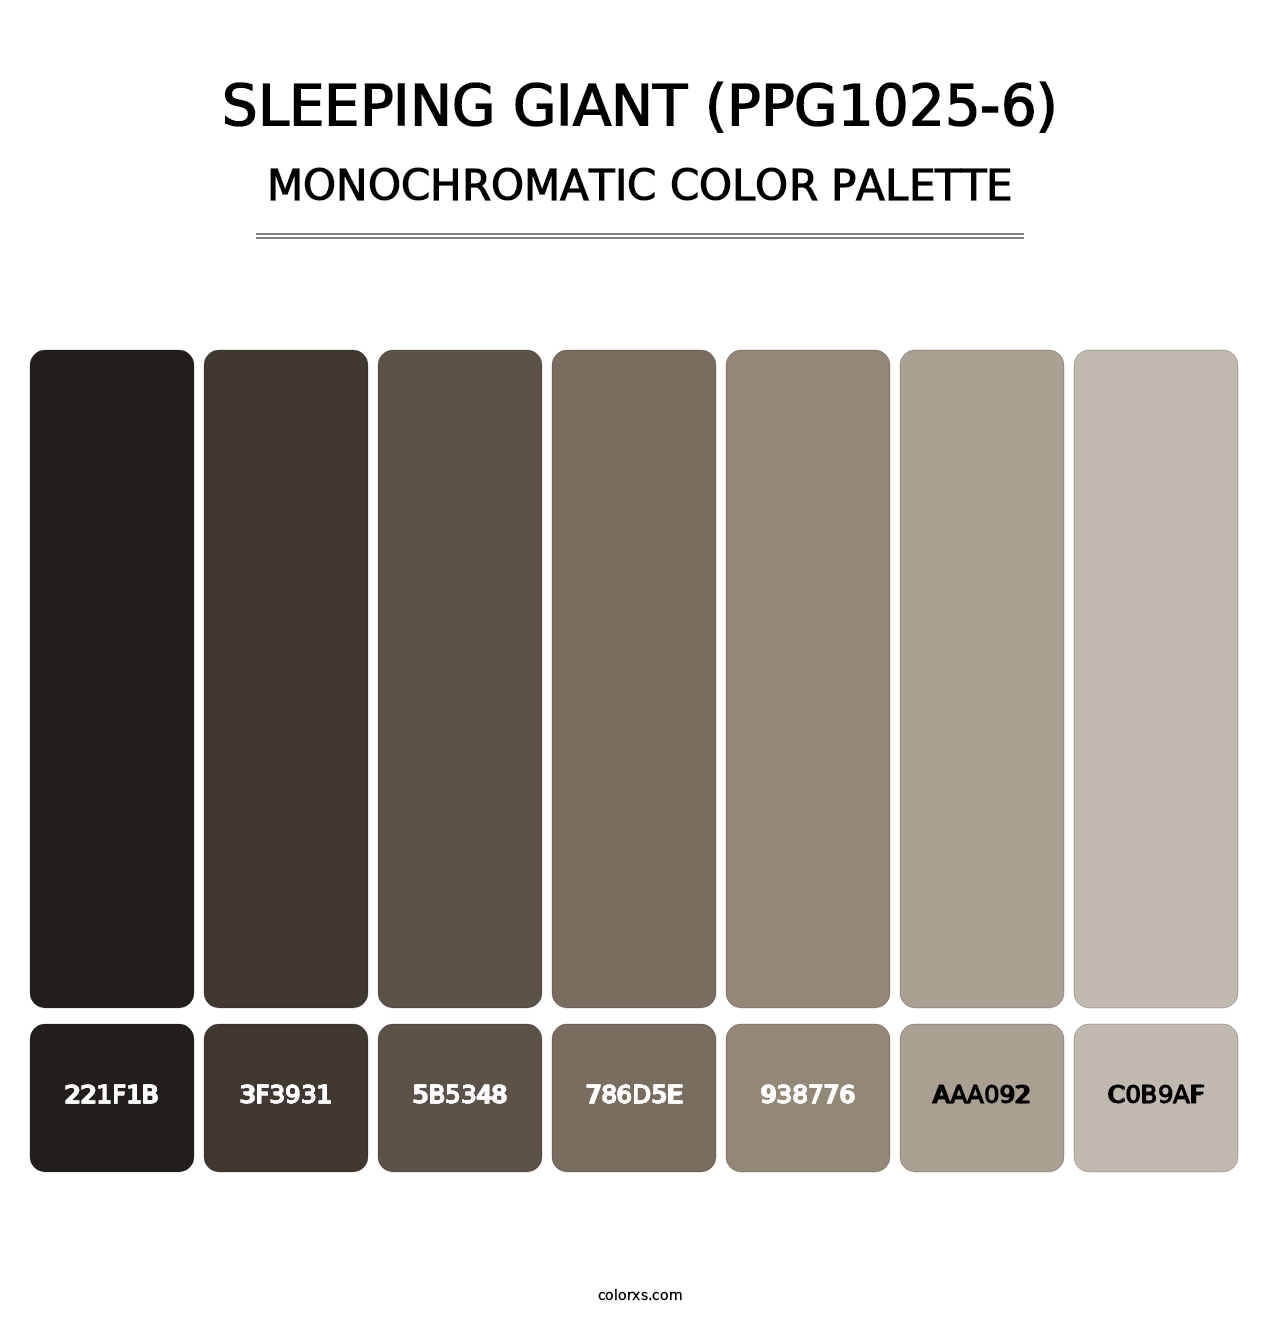 Sleeping Giant (PPG1025-6) - Monochromatic Color Palette